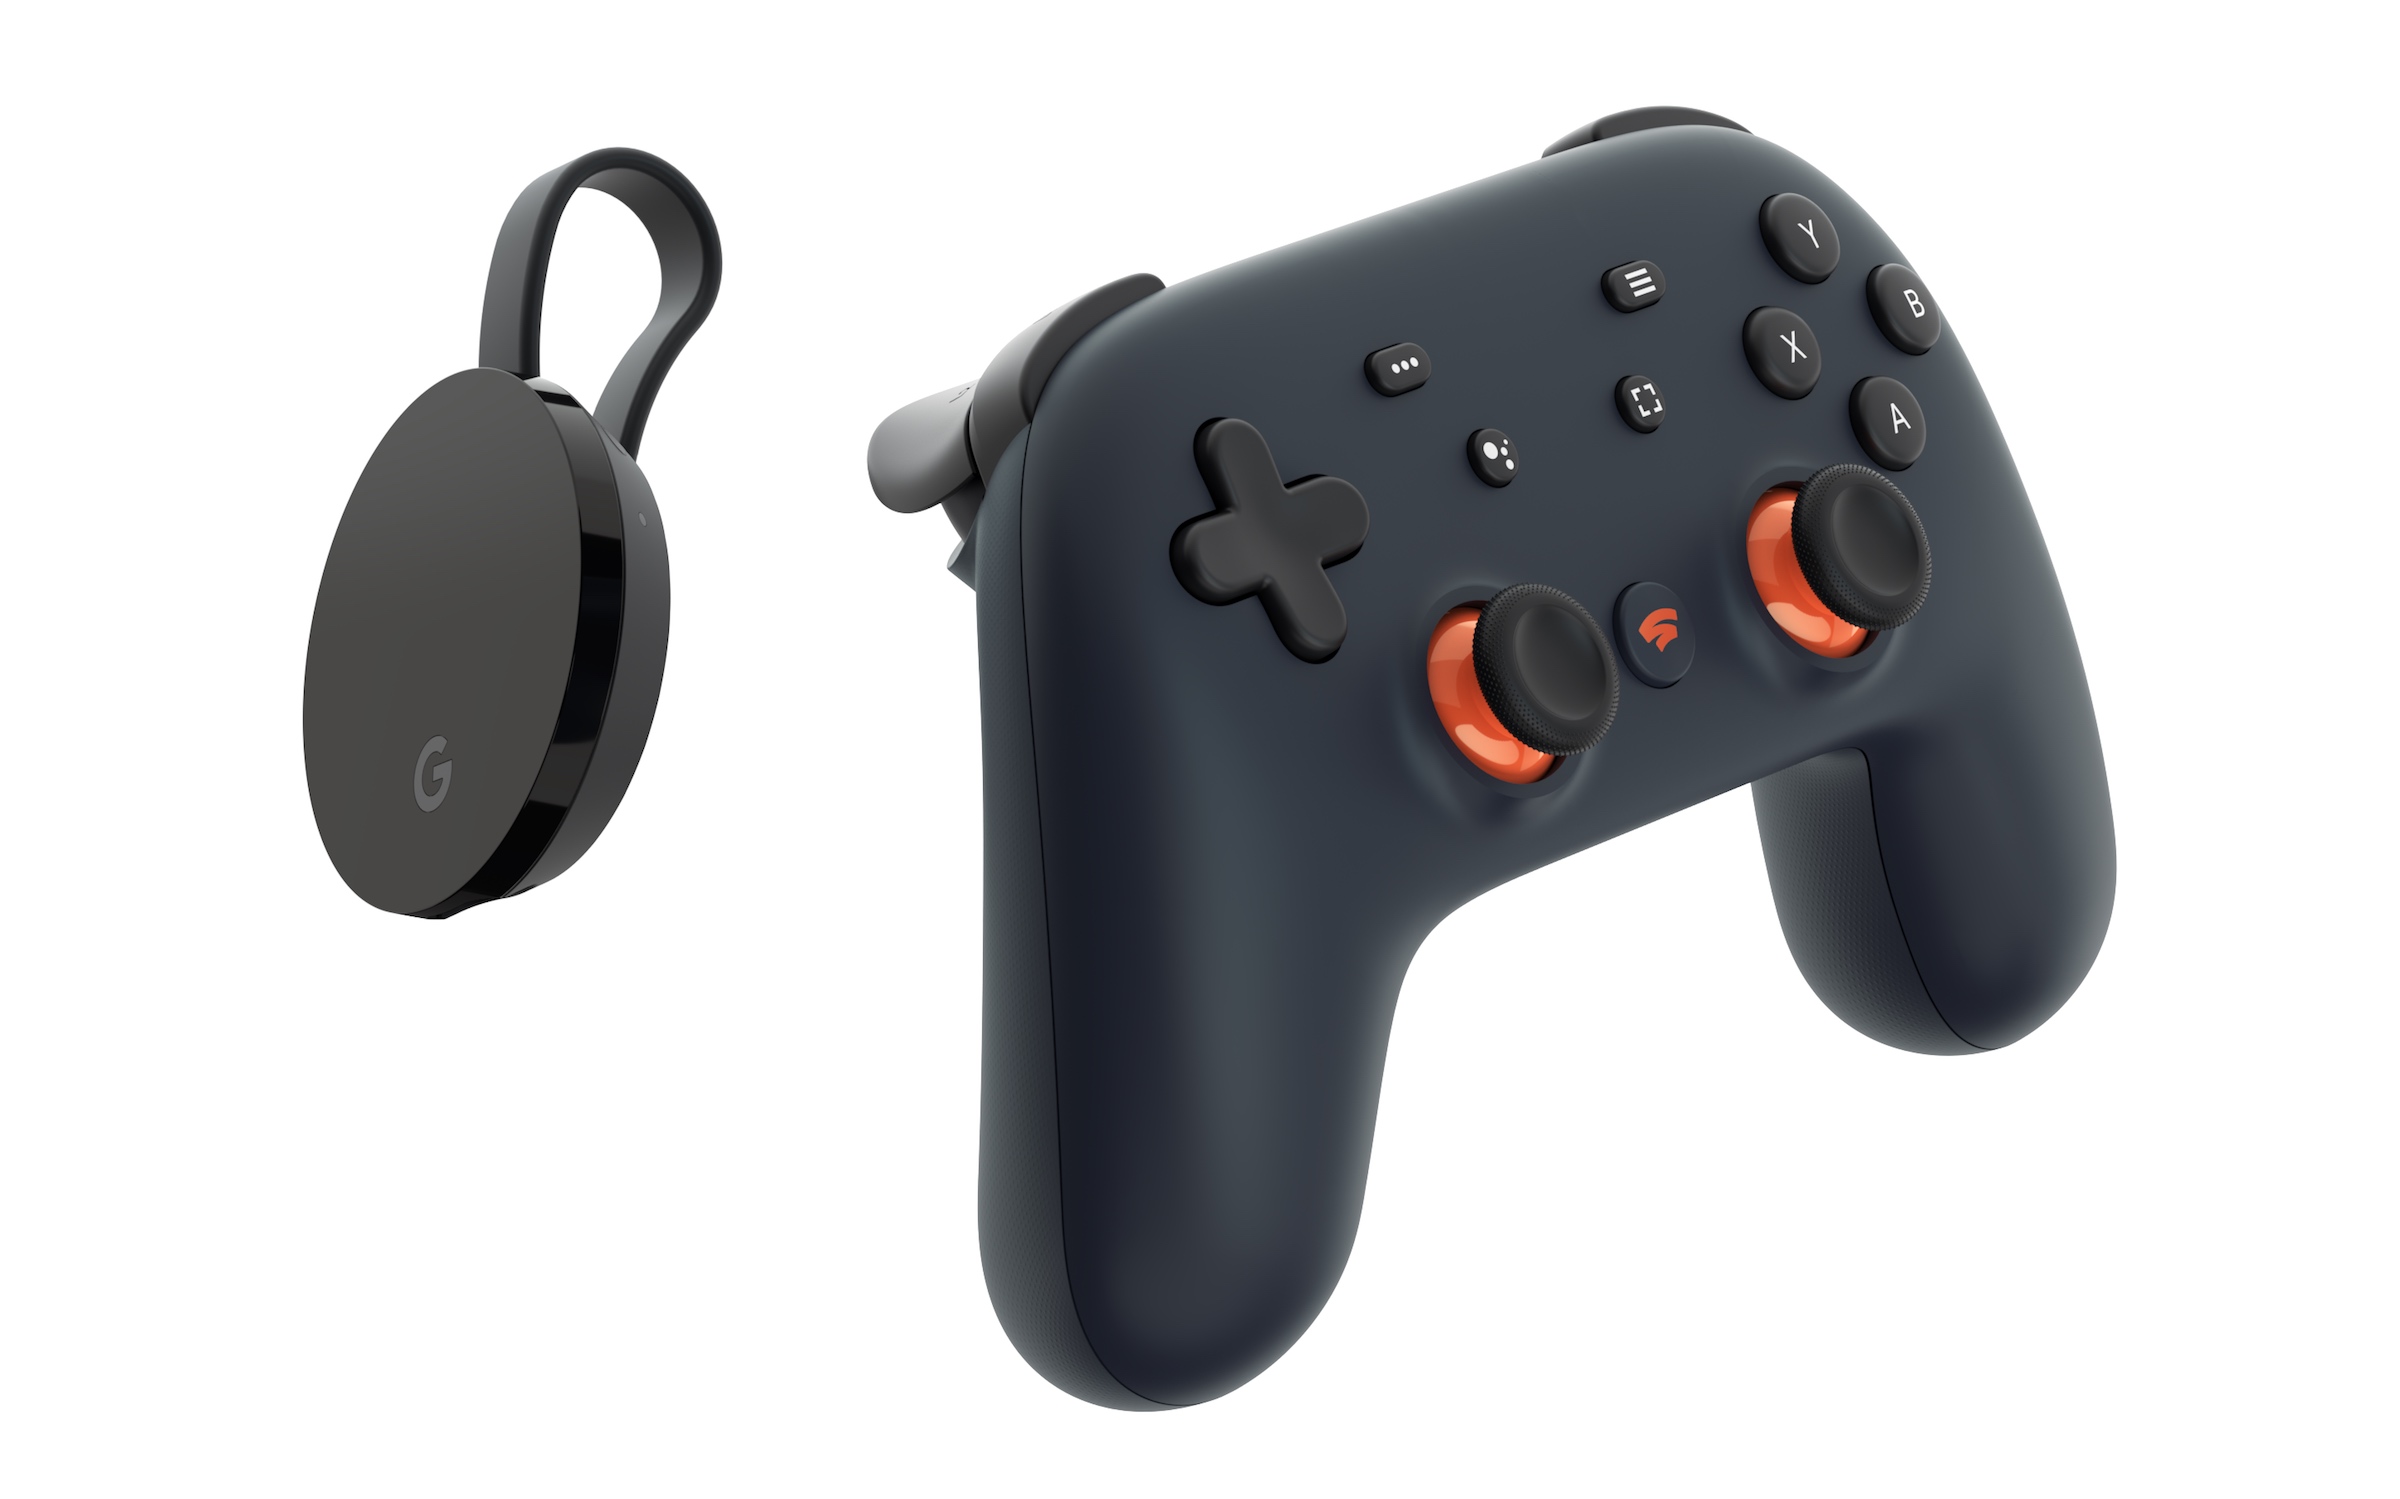 Google Chromecast Ultra and Stadia Founders Edition controller